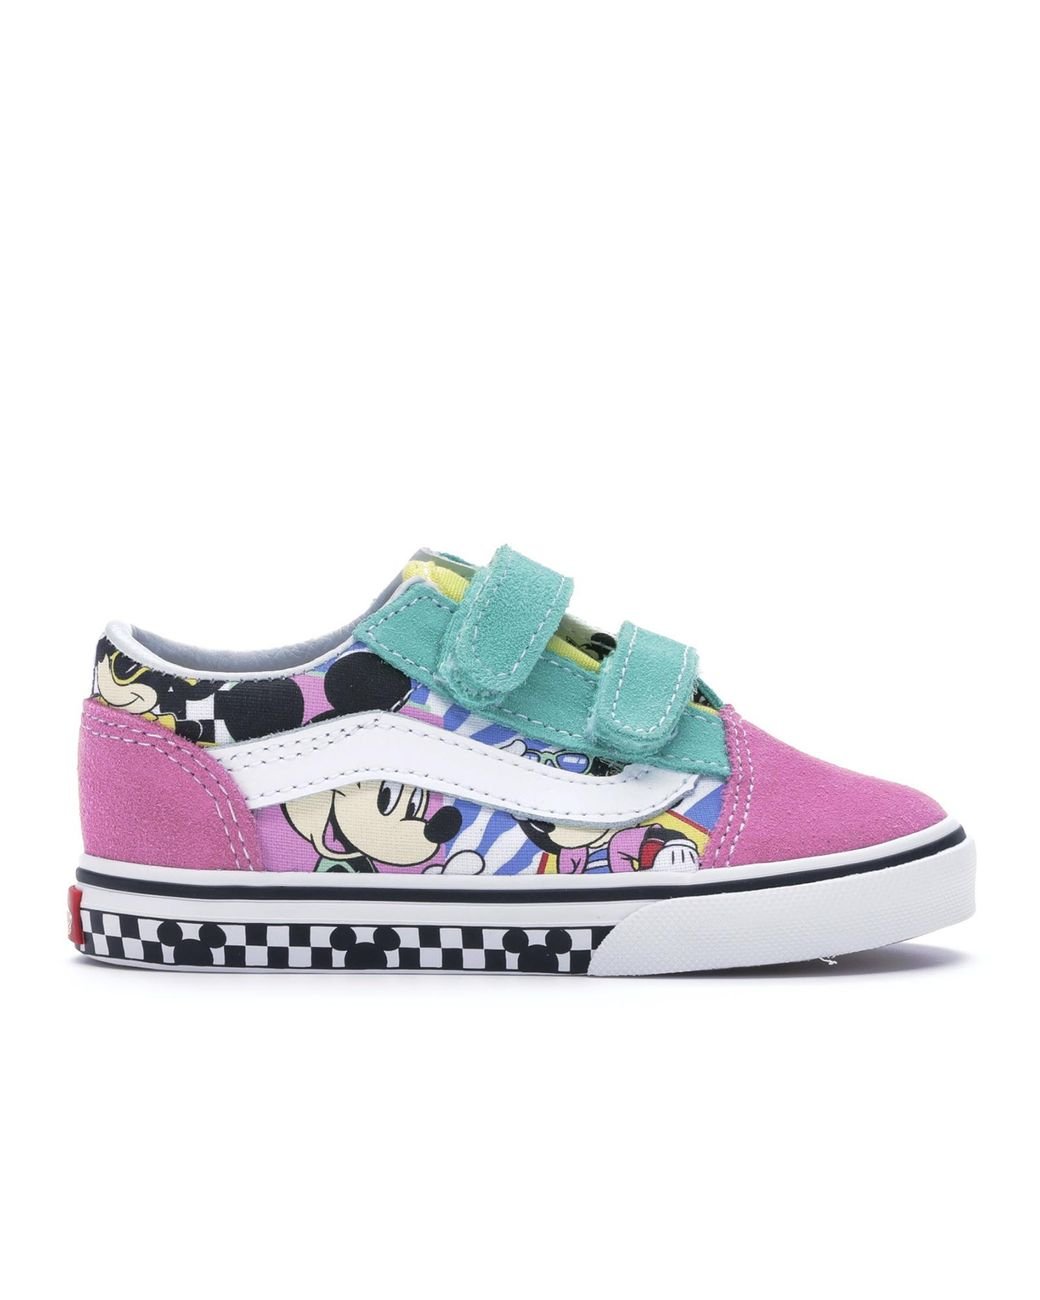 vans mickey mouse baby